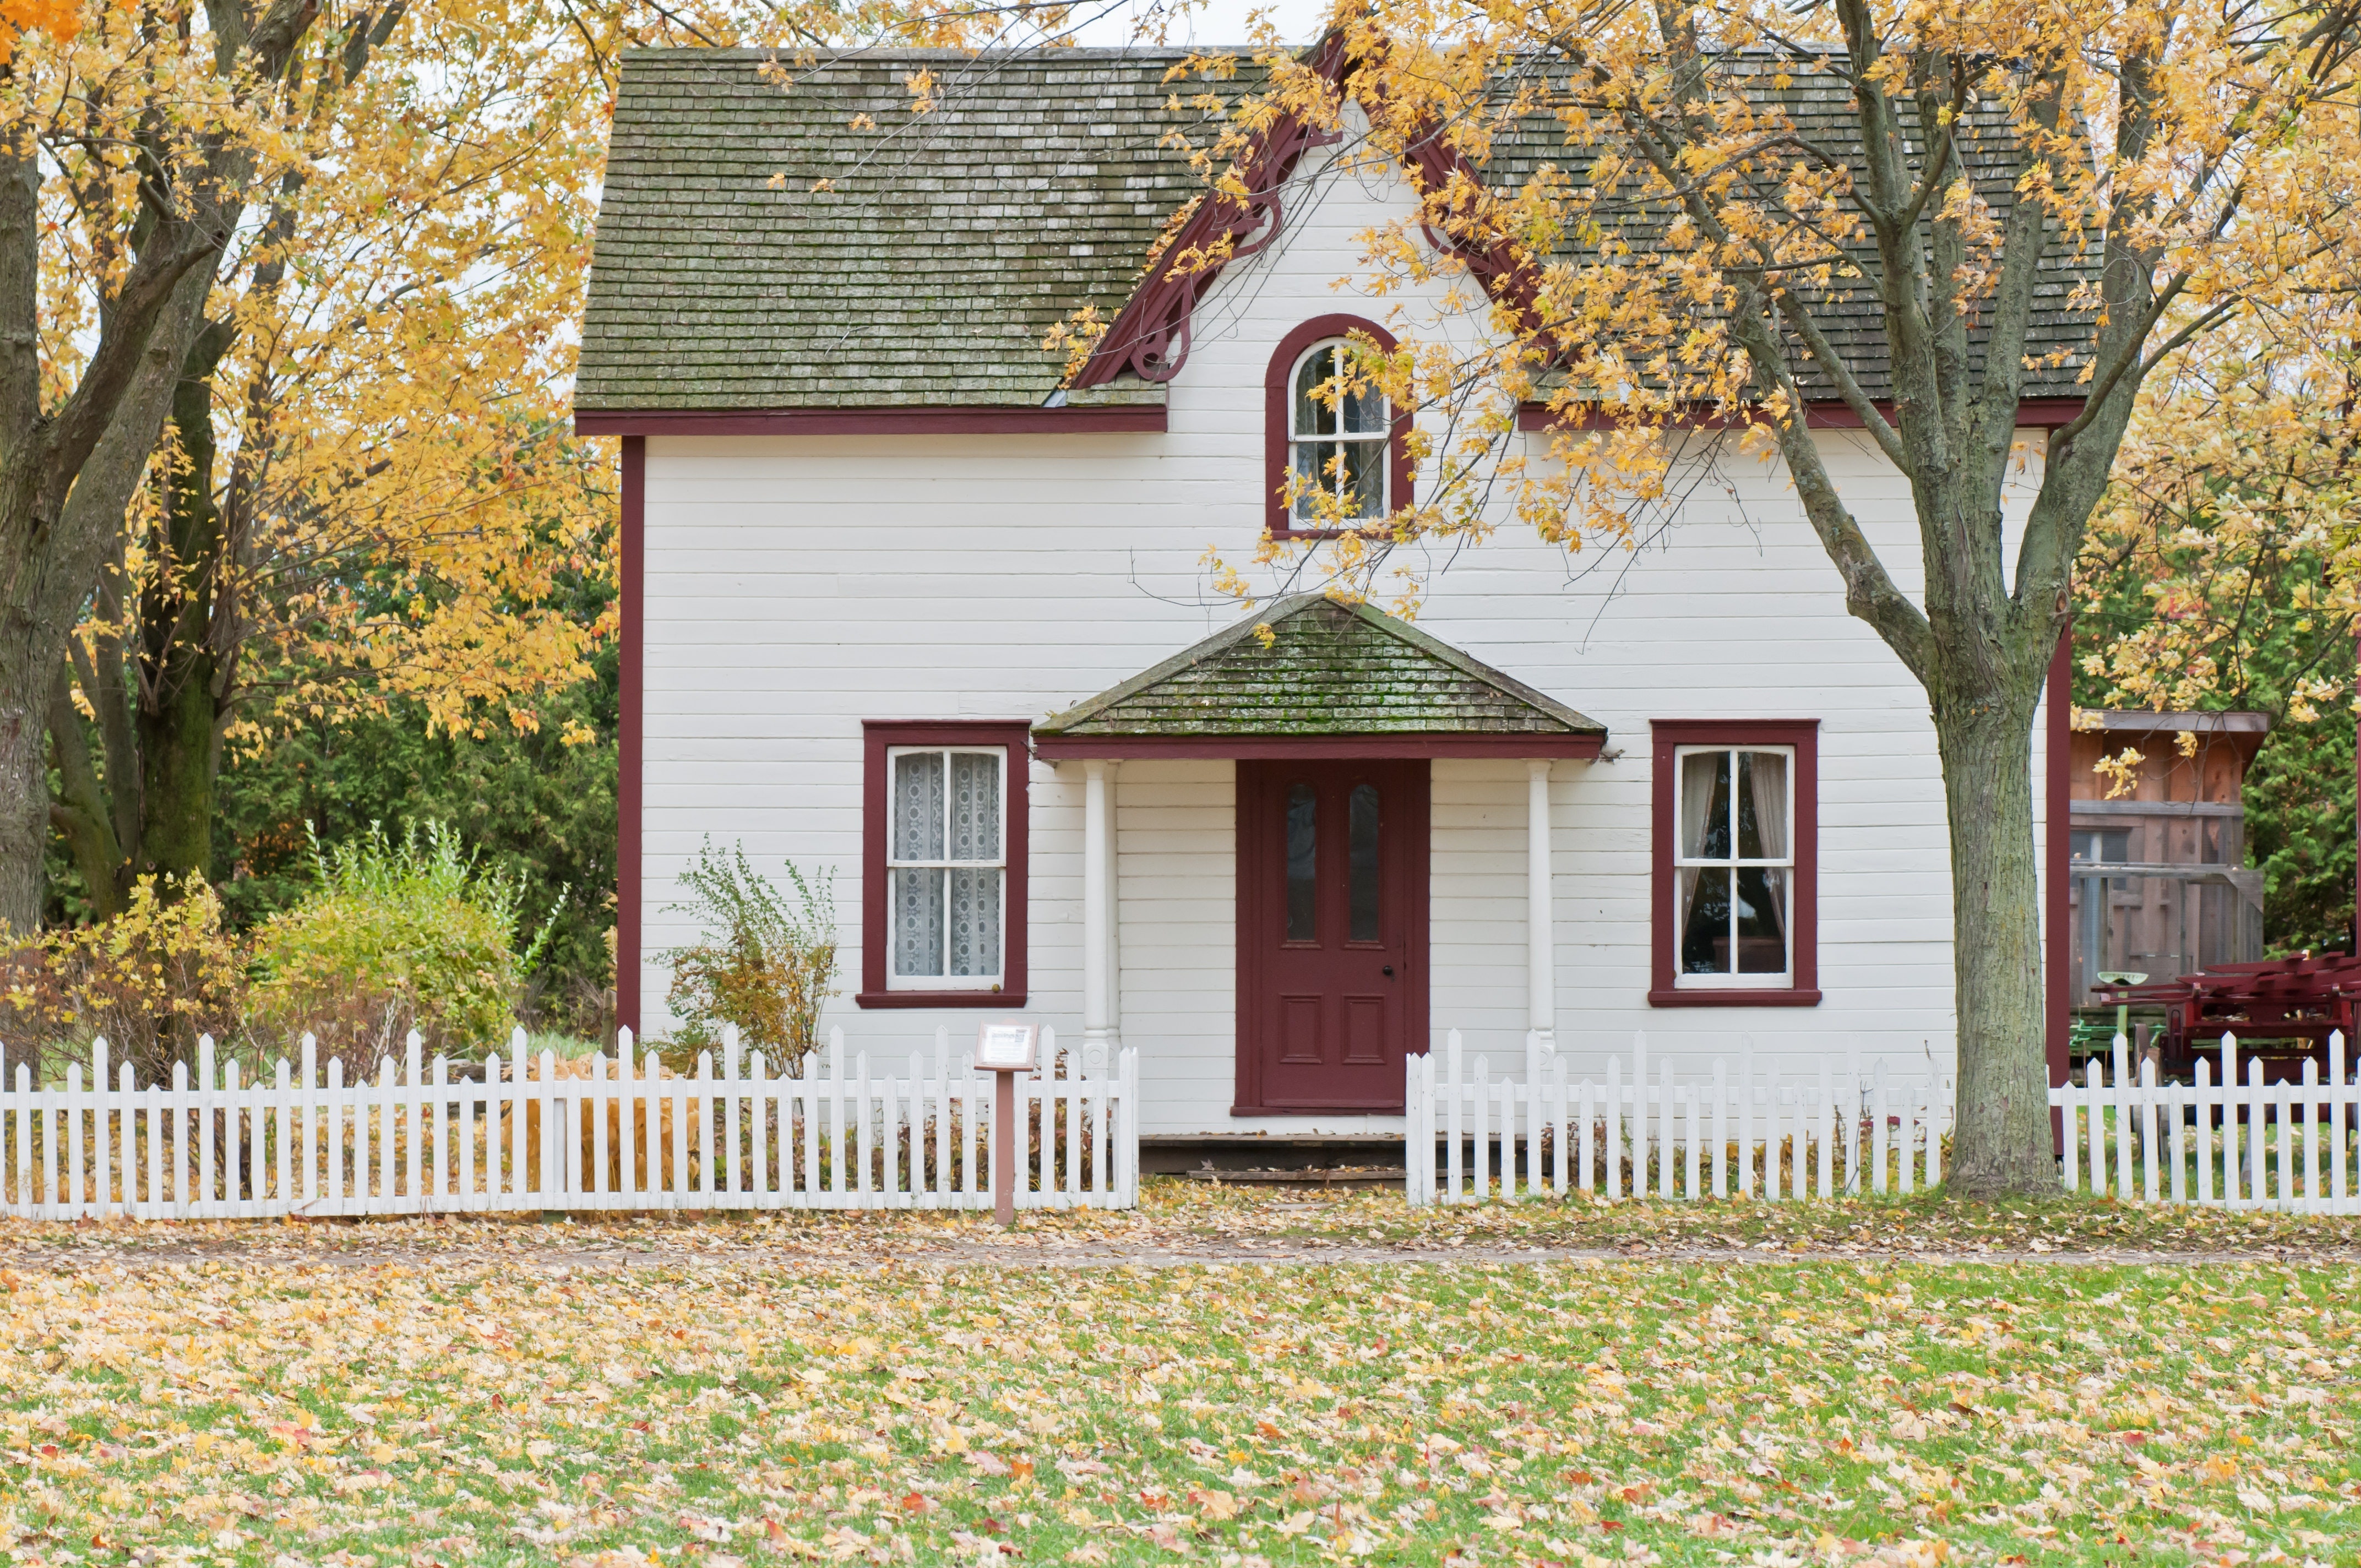 Should You Sell or Rent Your Home When You Move?